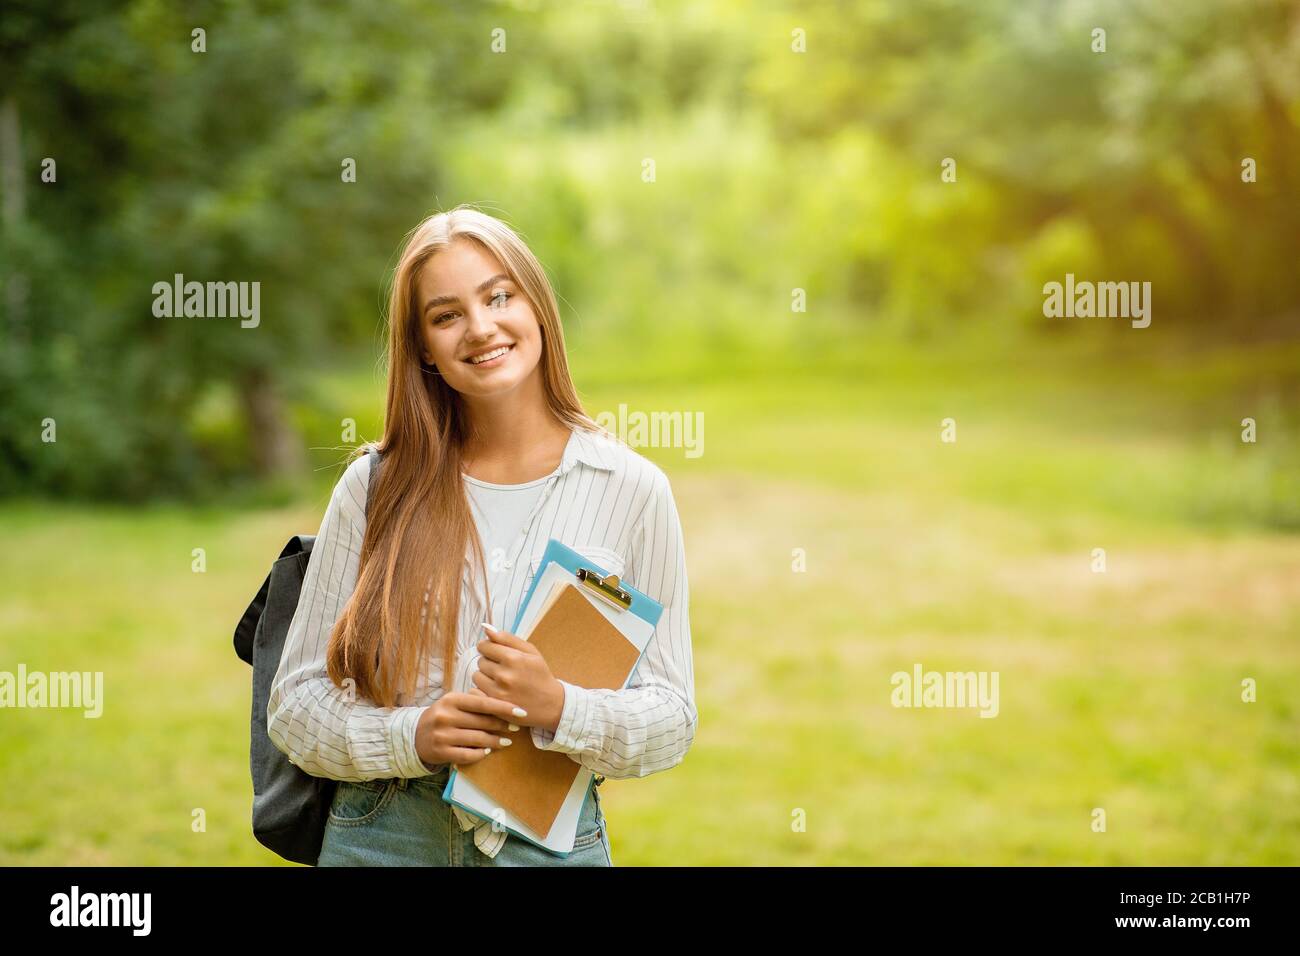 Outdoor Portrait Of Smiling College Student Girl With Backpack And Workbooks Stock Photo